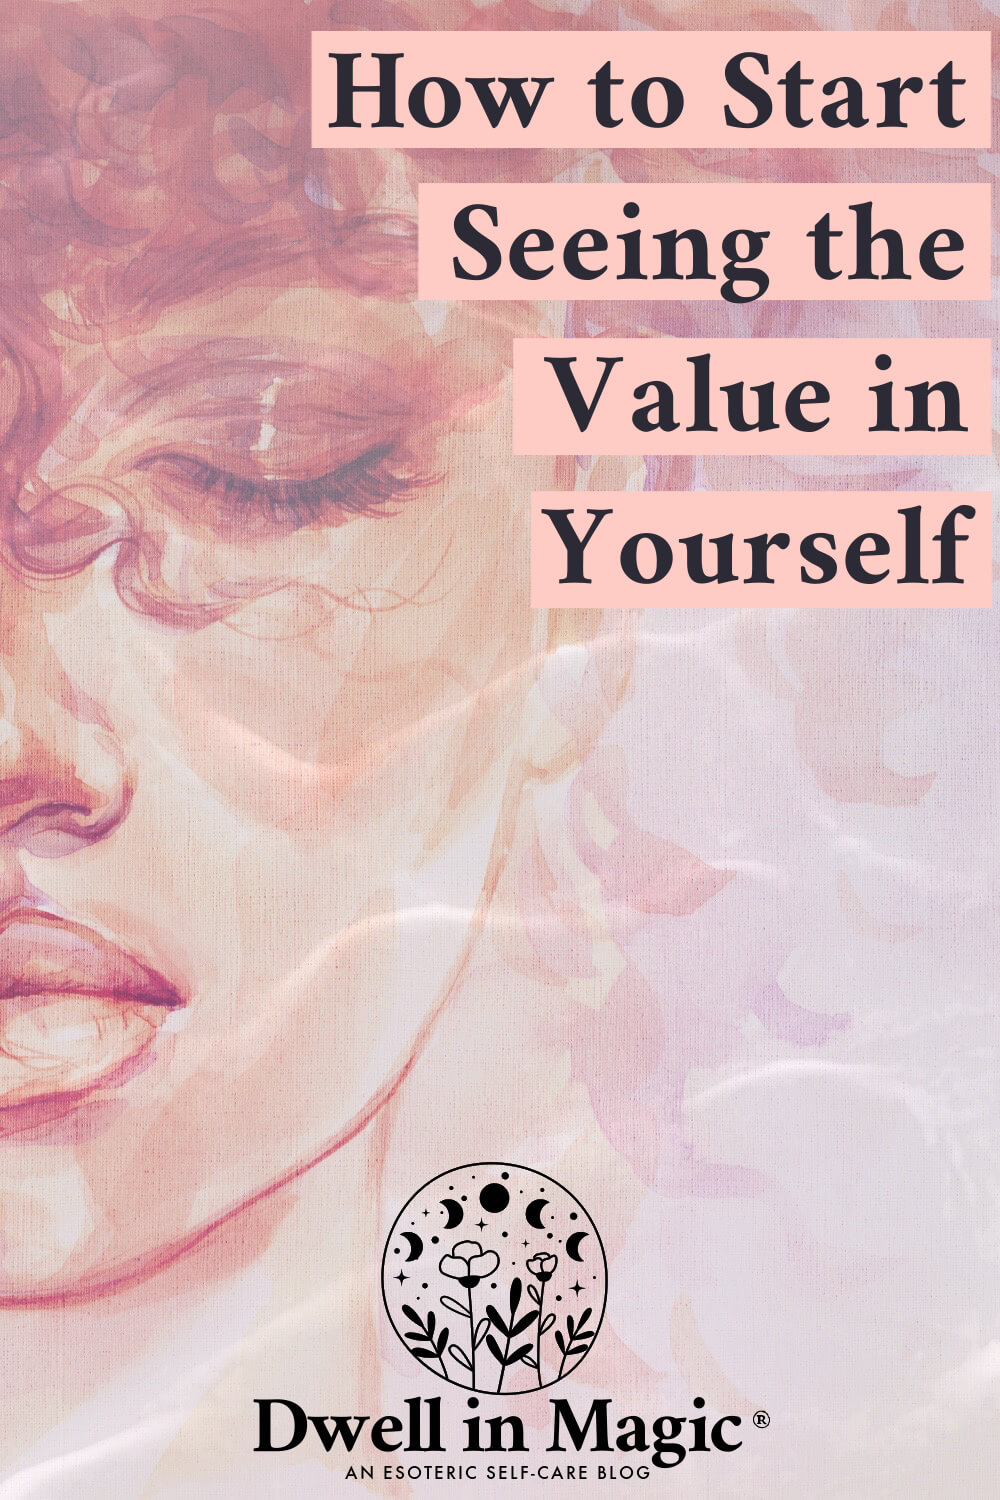 How to start seeing the value in yourself